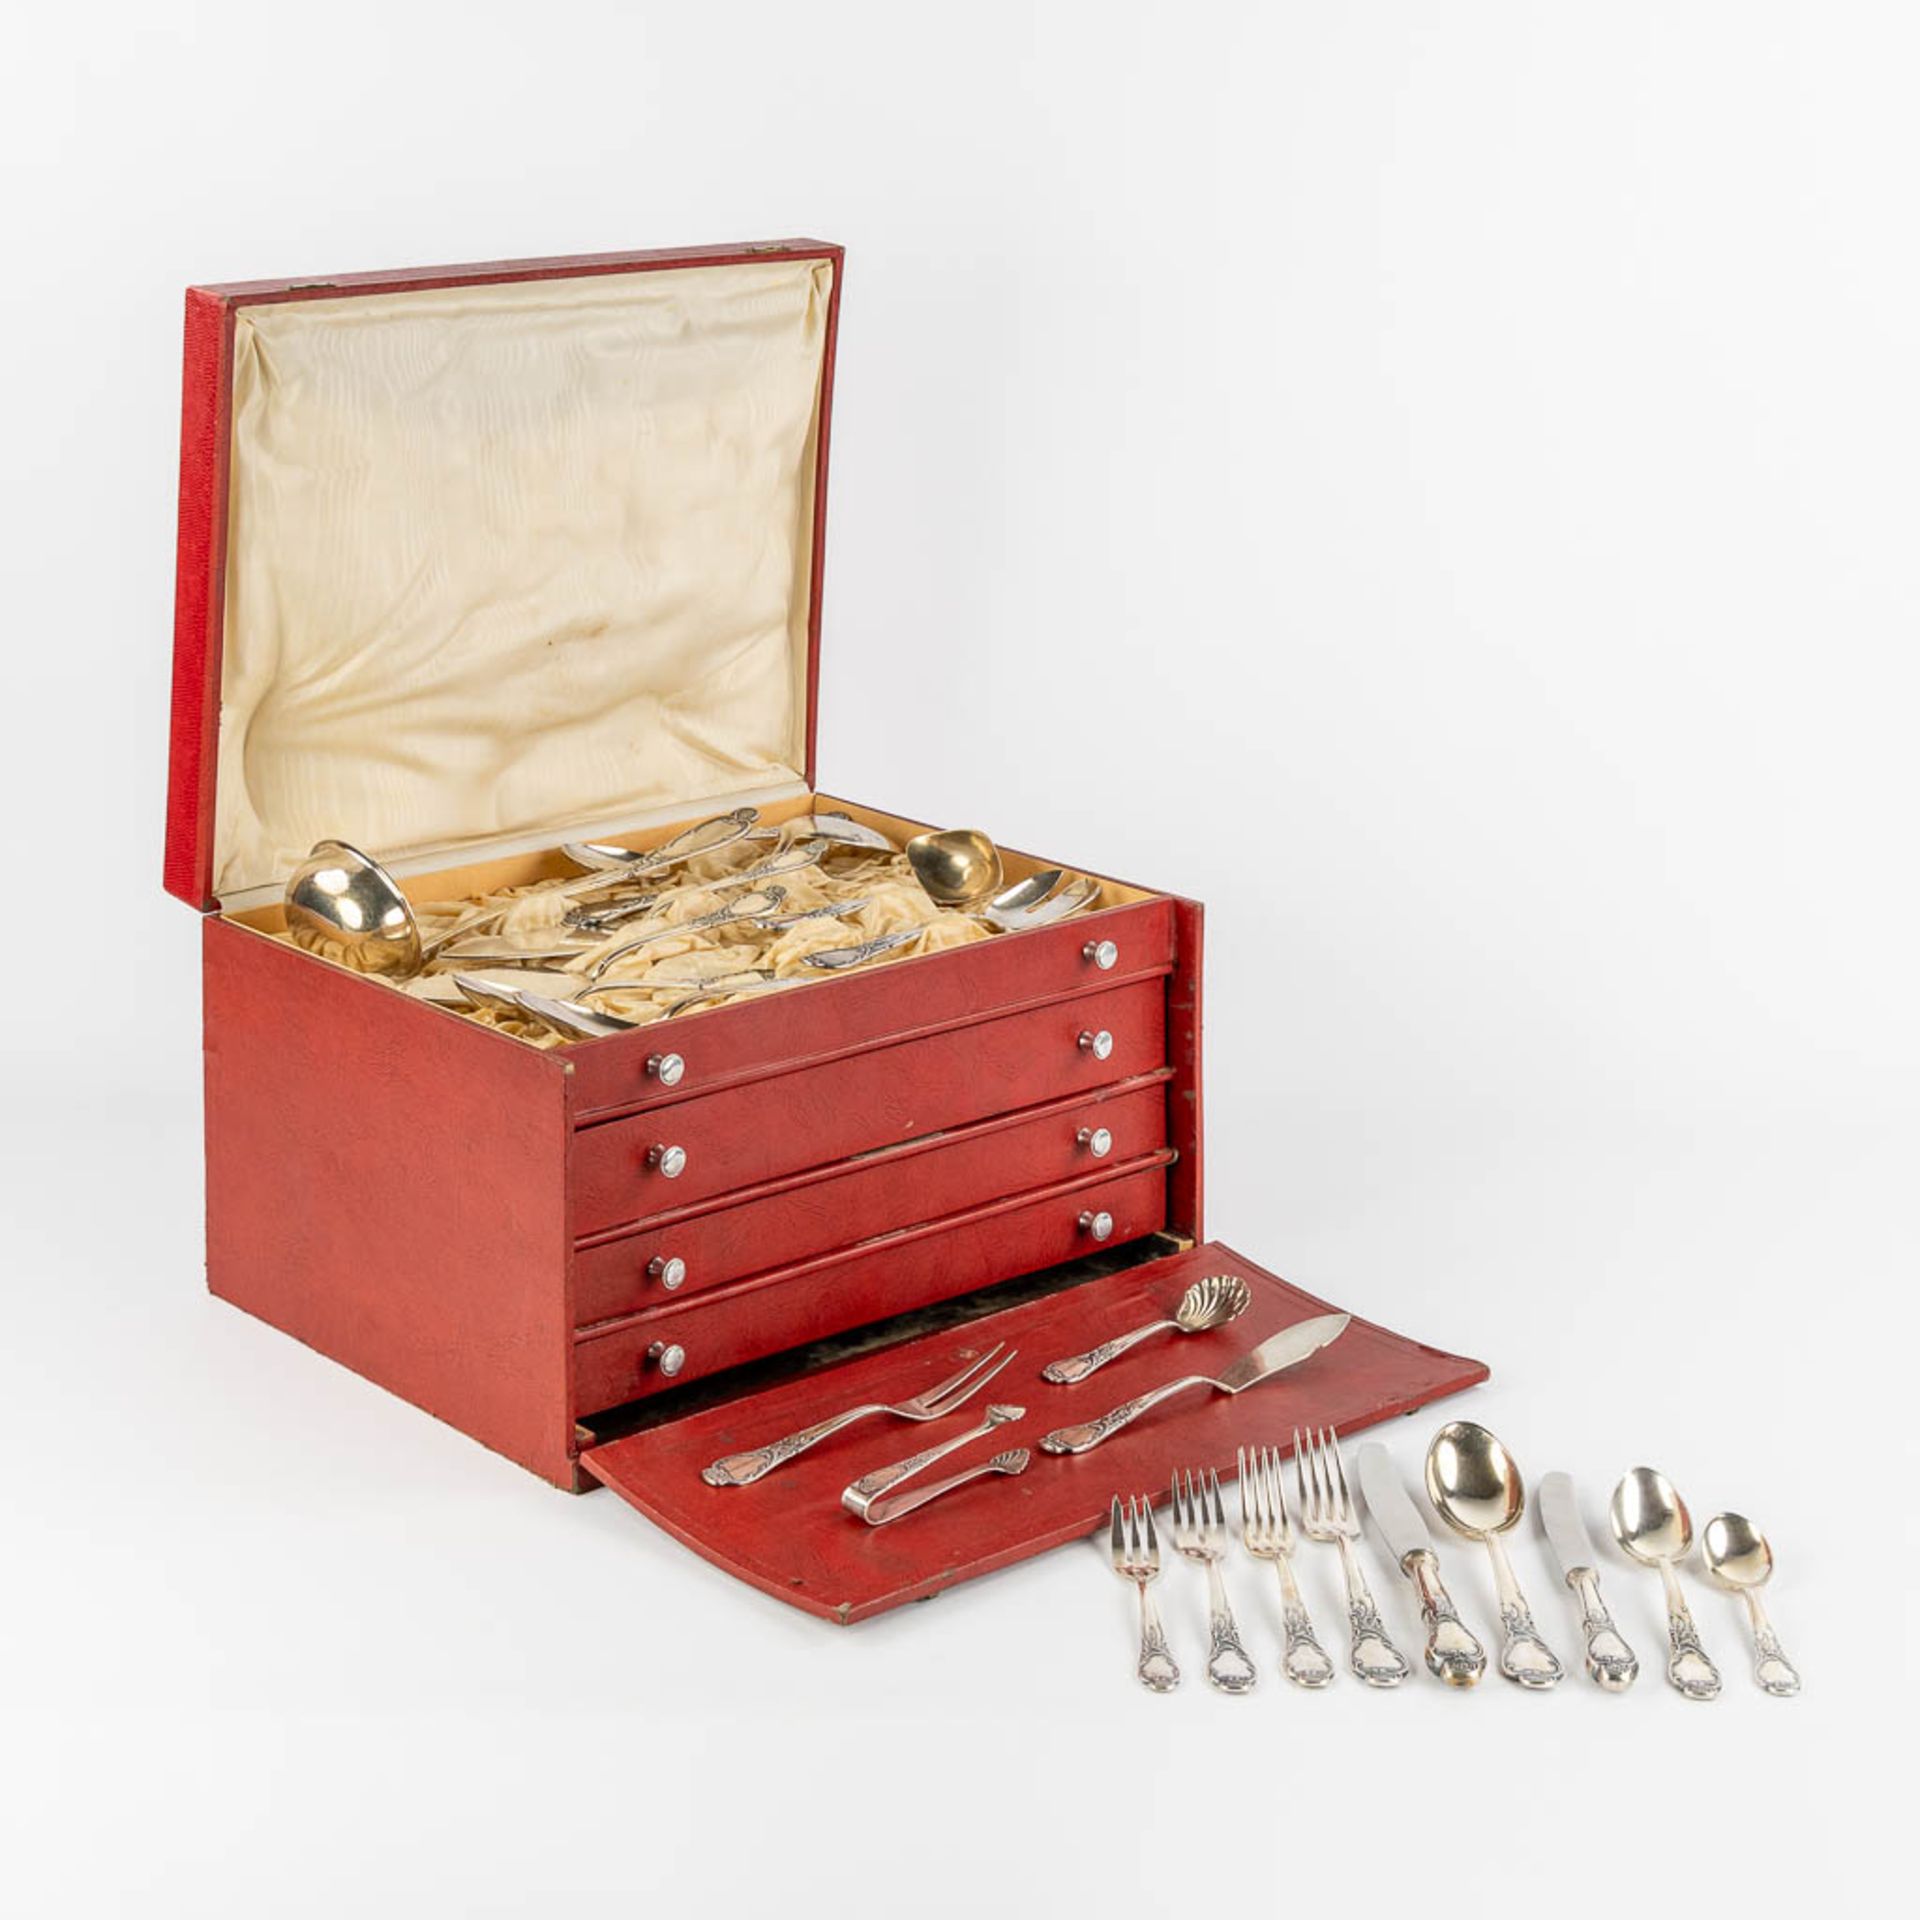 A 136-piece silver-plated cultlery in a chest with drawers. Alpaca, Silber 100. (L:34 x W:44 x H:26